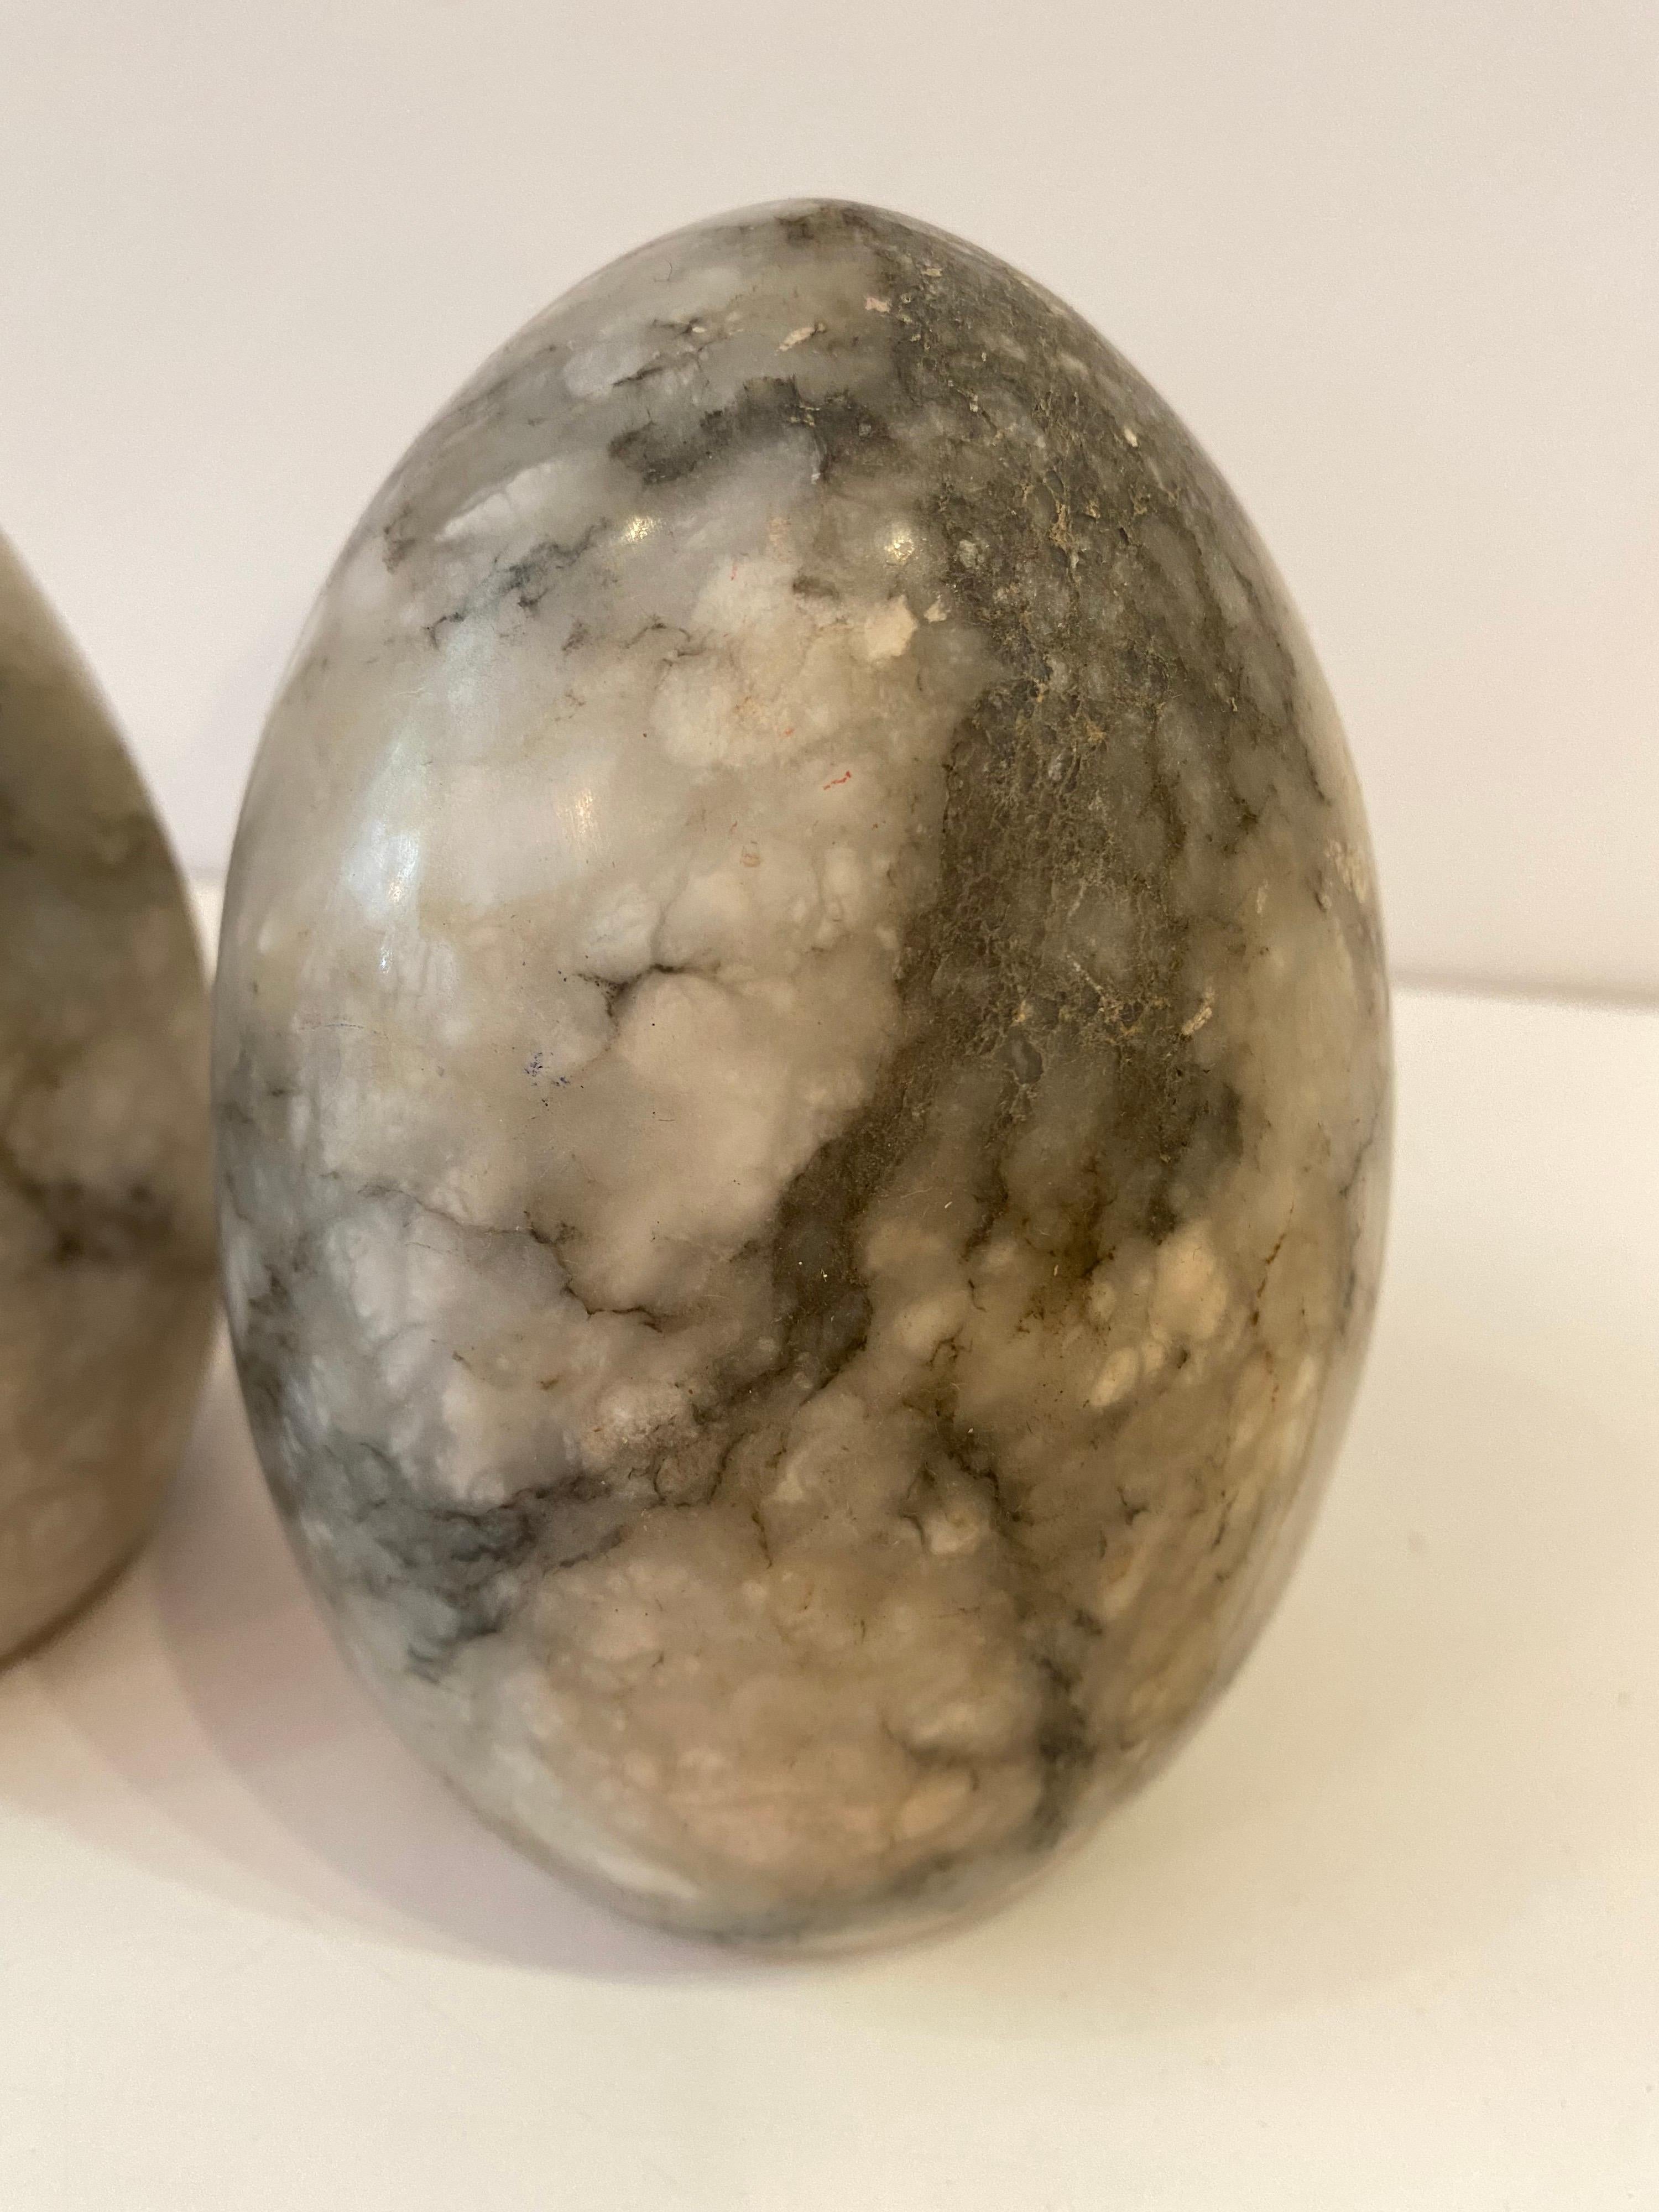 egg shaped marbles